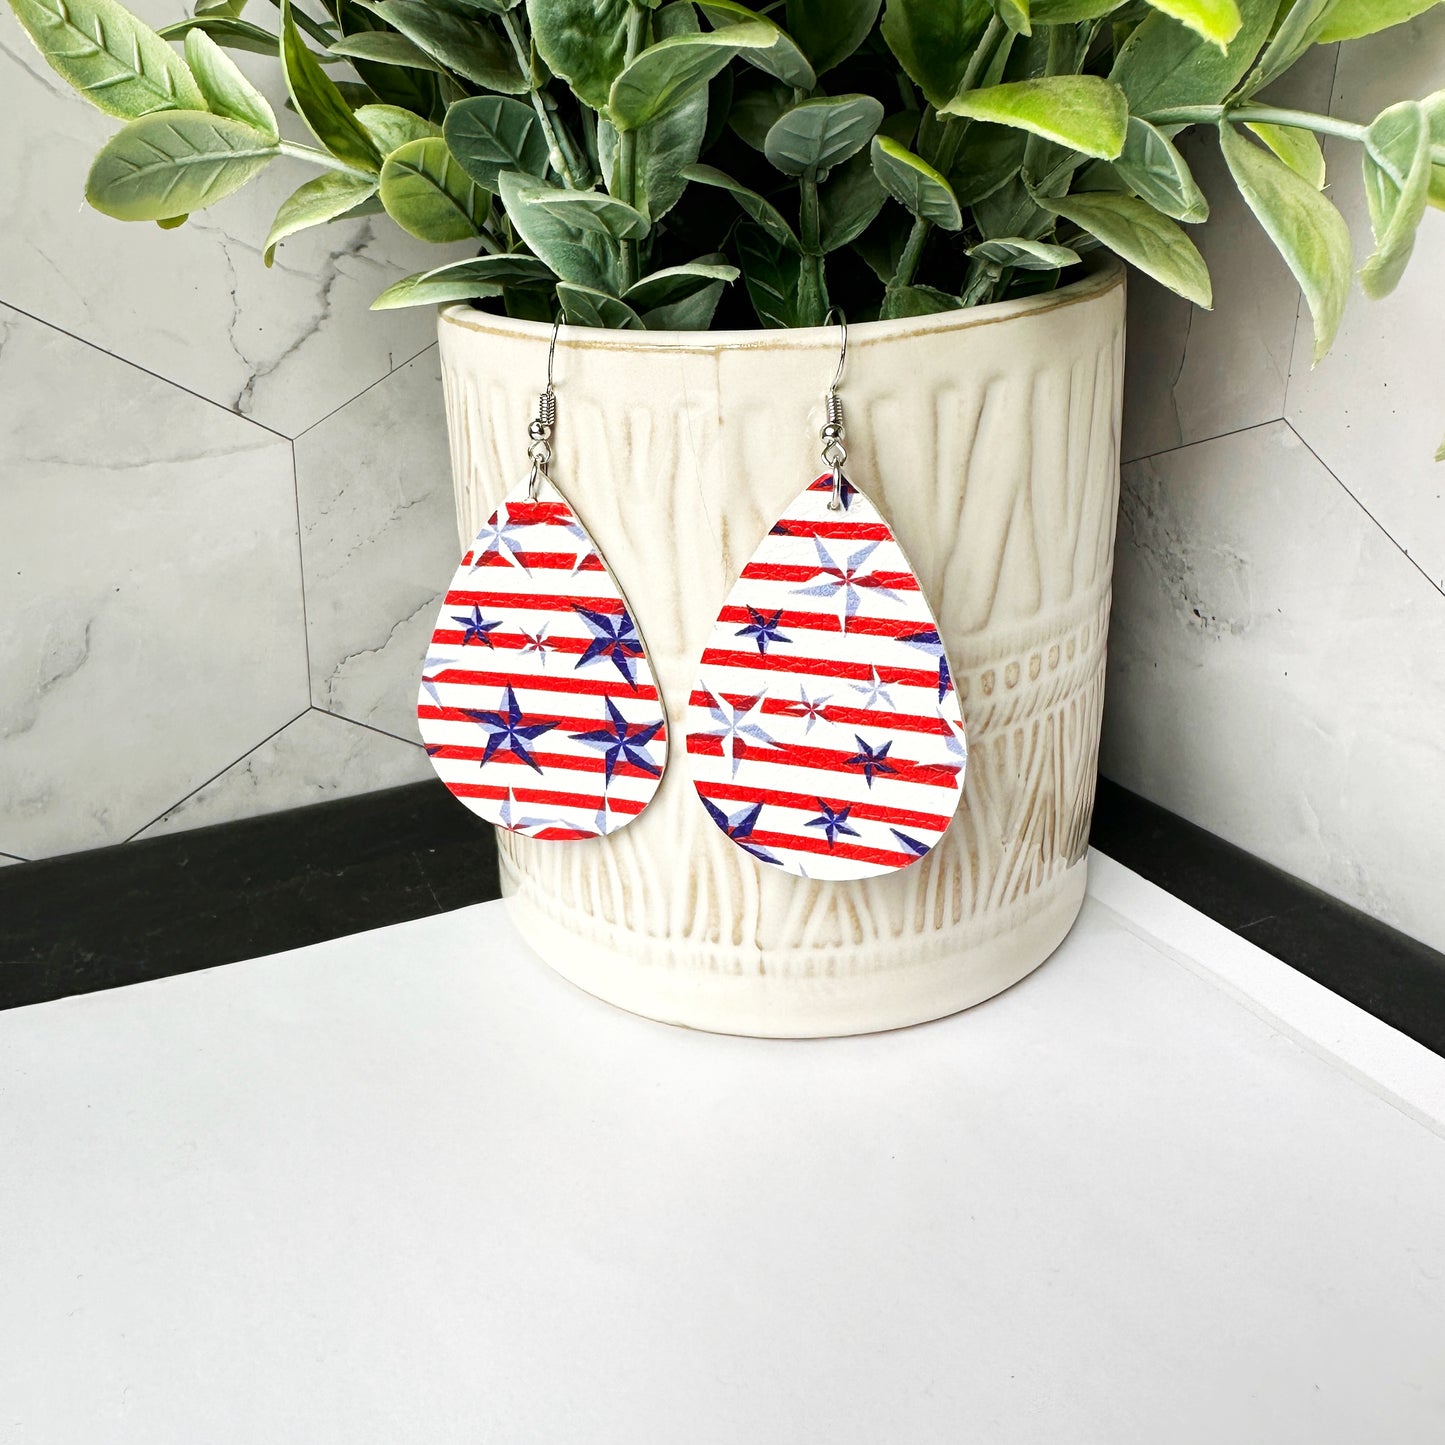 Irma - Stars and Stripes Patriotic 4th of July earrings